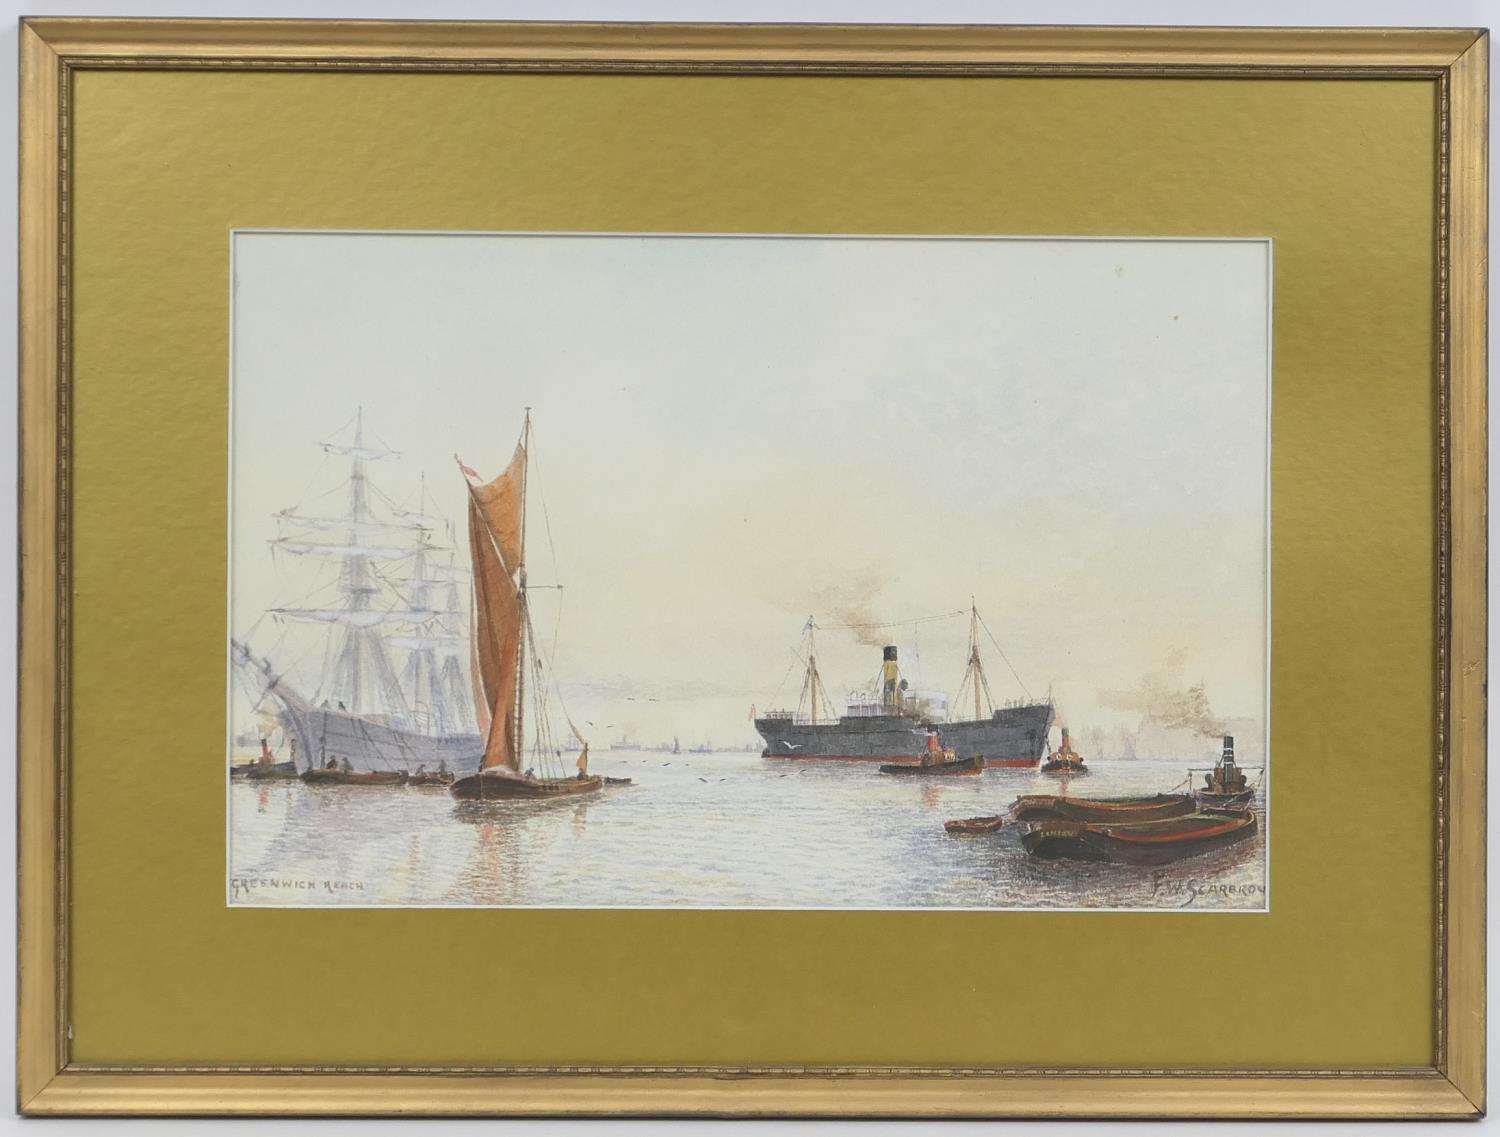 Frank William Scarbrough (1860-1939), Greenwich Reach, watercolour, signed, dated and titled, 26cm x